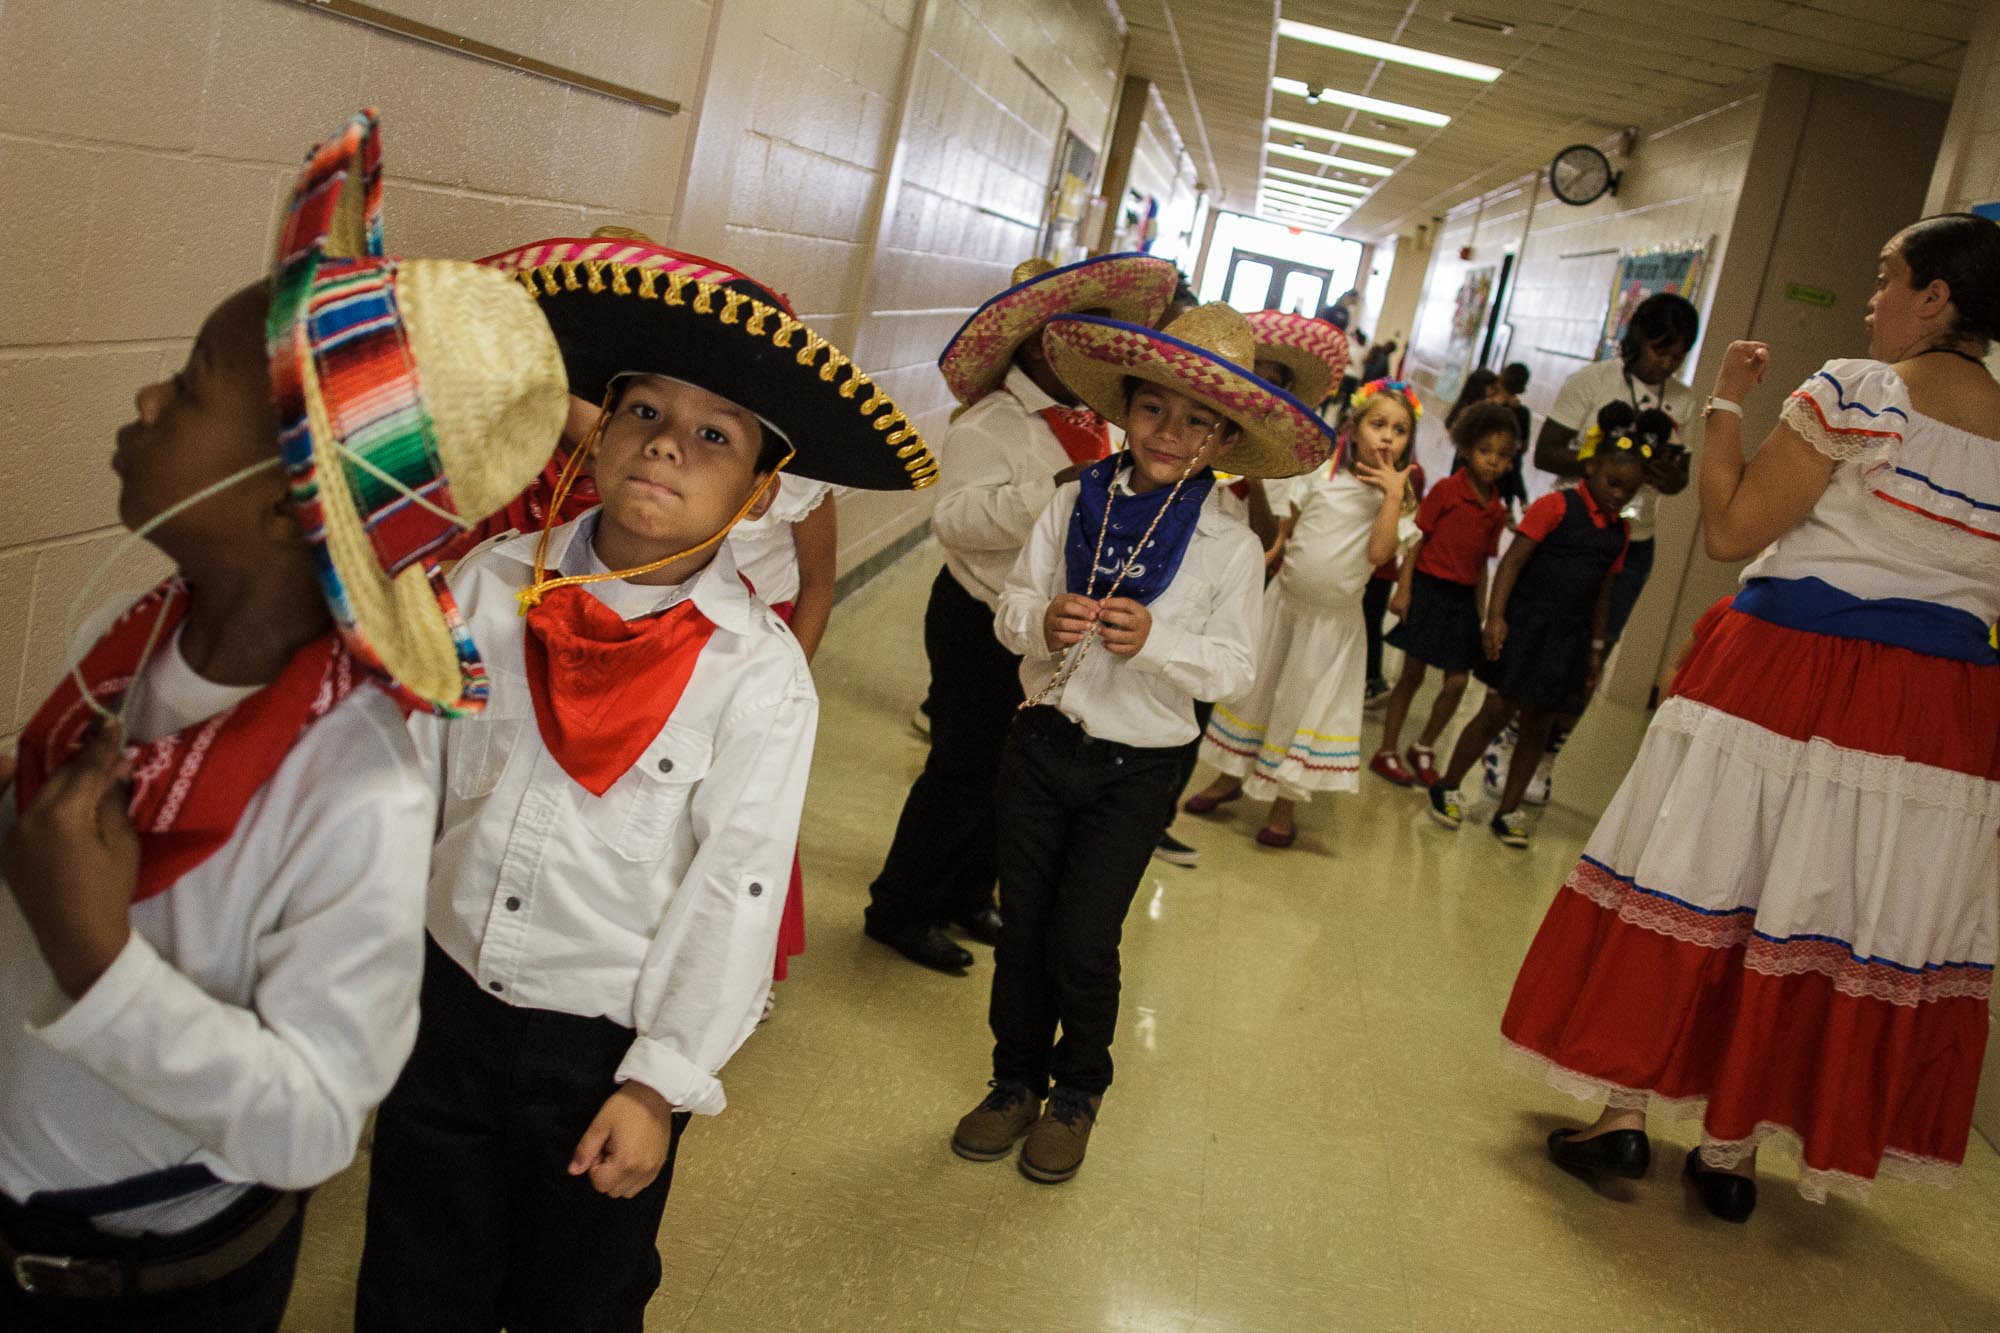 First grade students line up and prepare to sing Cielito Lindo, a popular Mexican song as part of Treadwell Elementary School’s celebration of Hispanic Heritage Month. (Renier Otto)